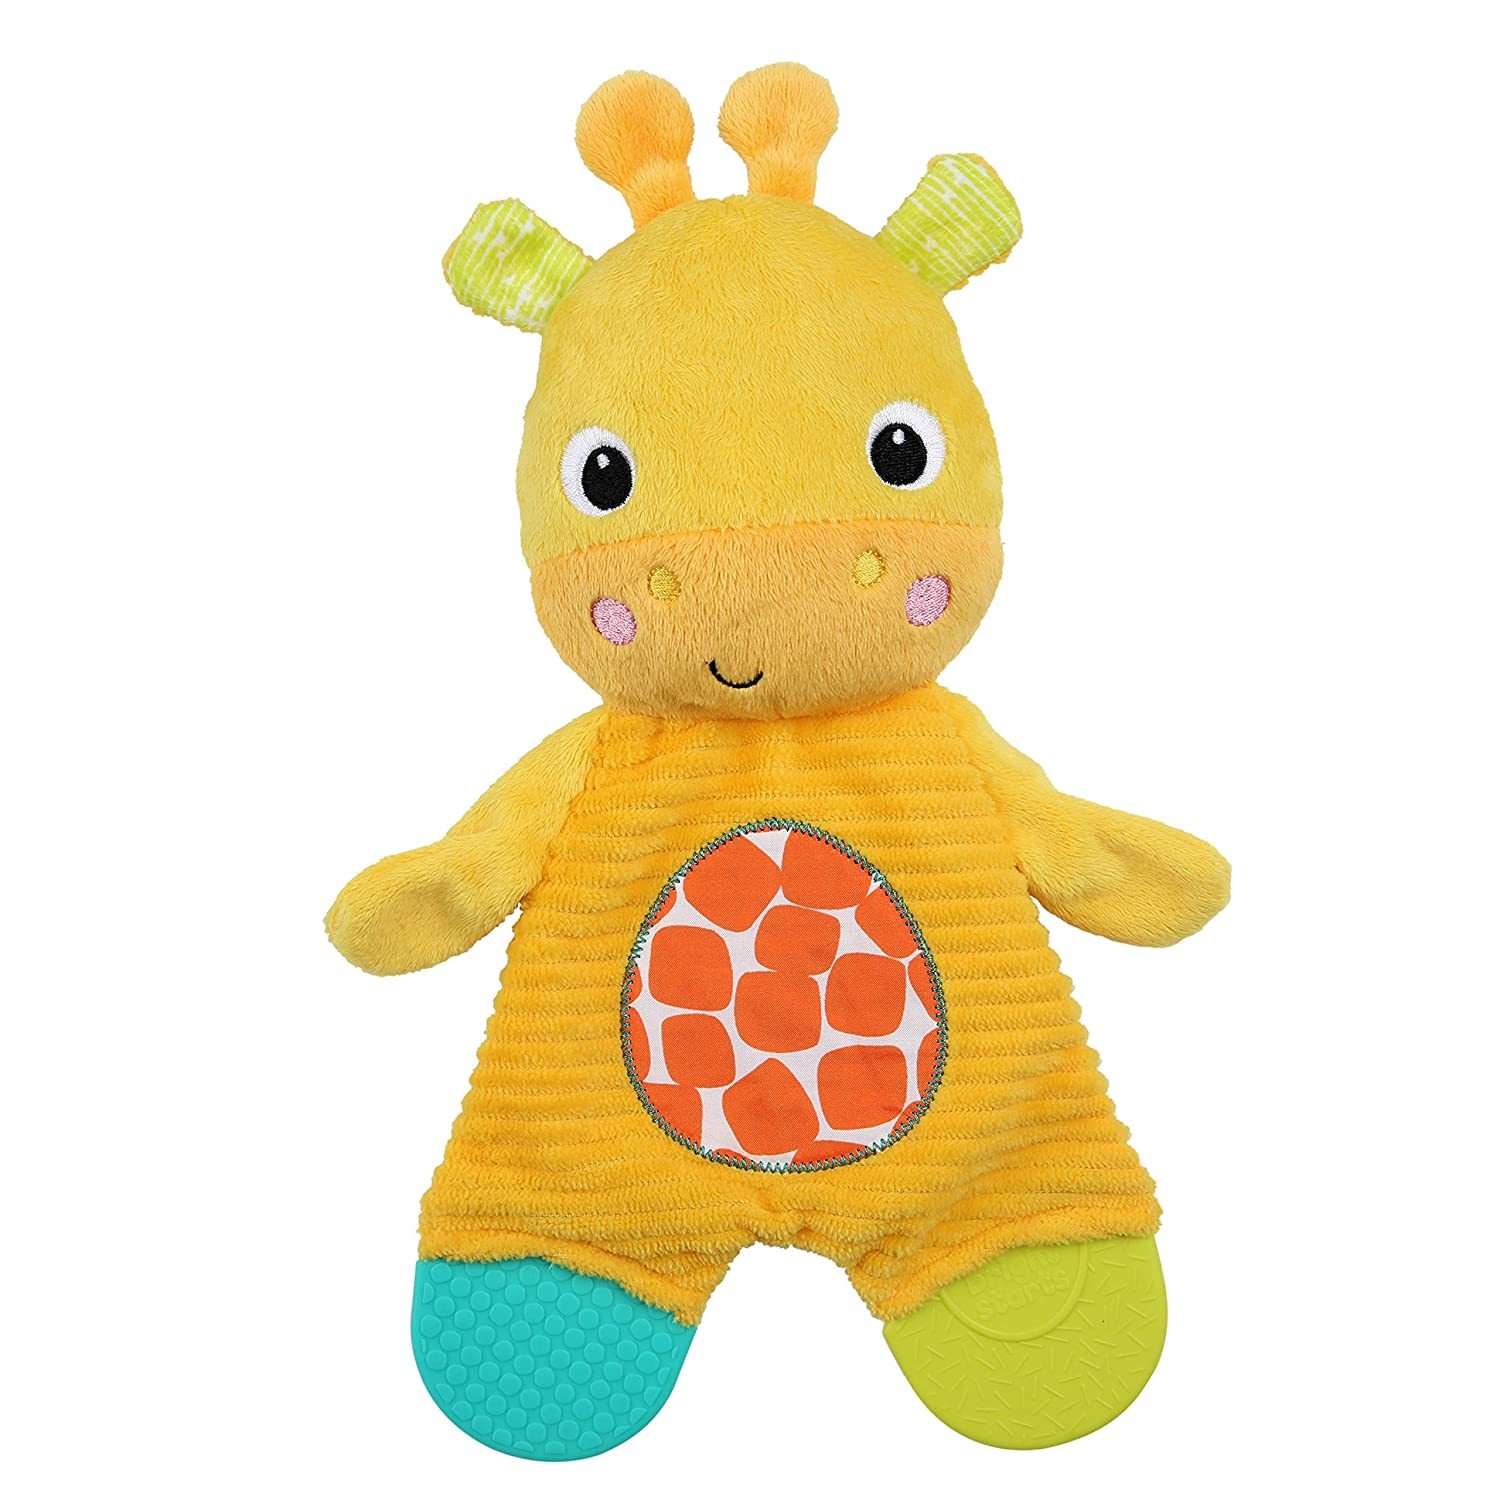 Best toys for 3- to 6-month-olds — Bright Starts Snuggle & Teethe Plush Teether Toy